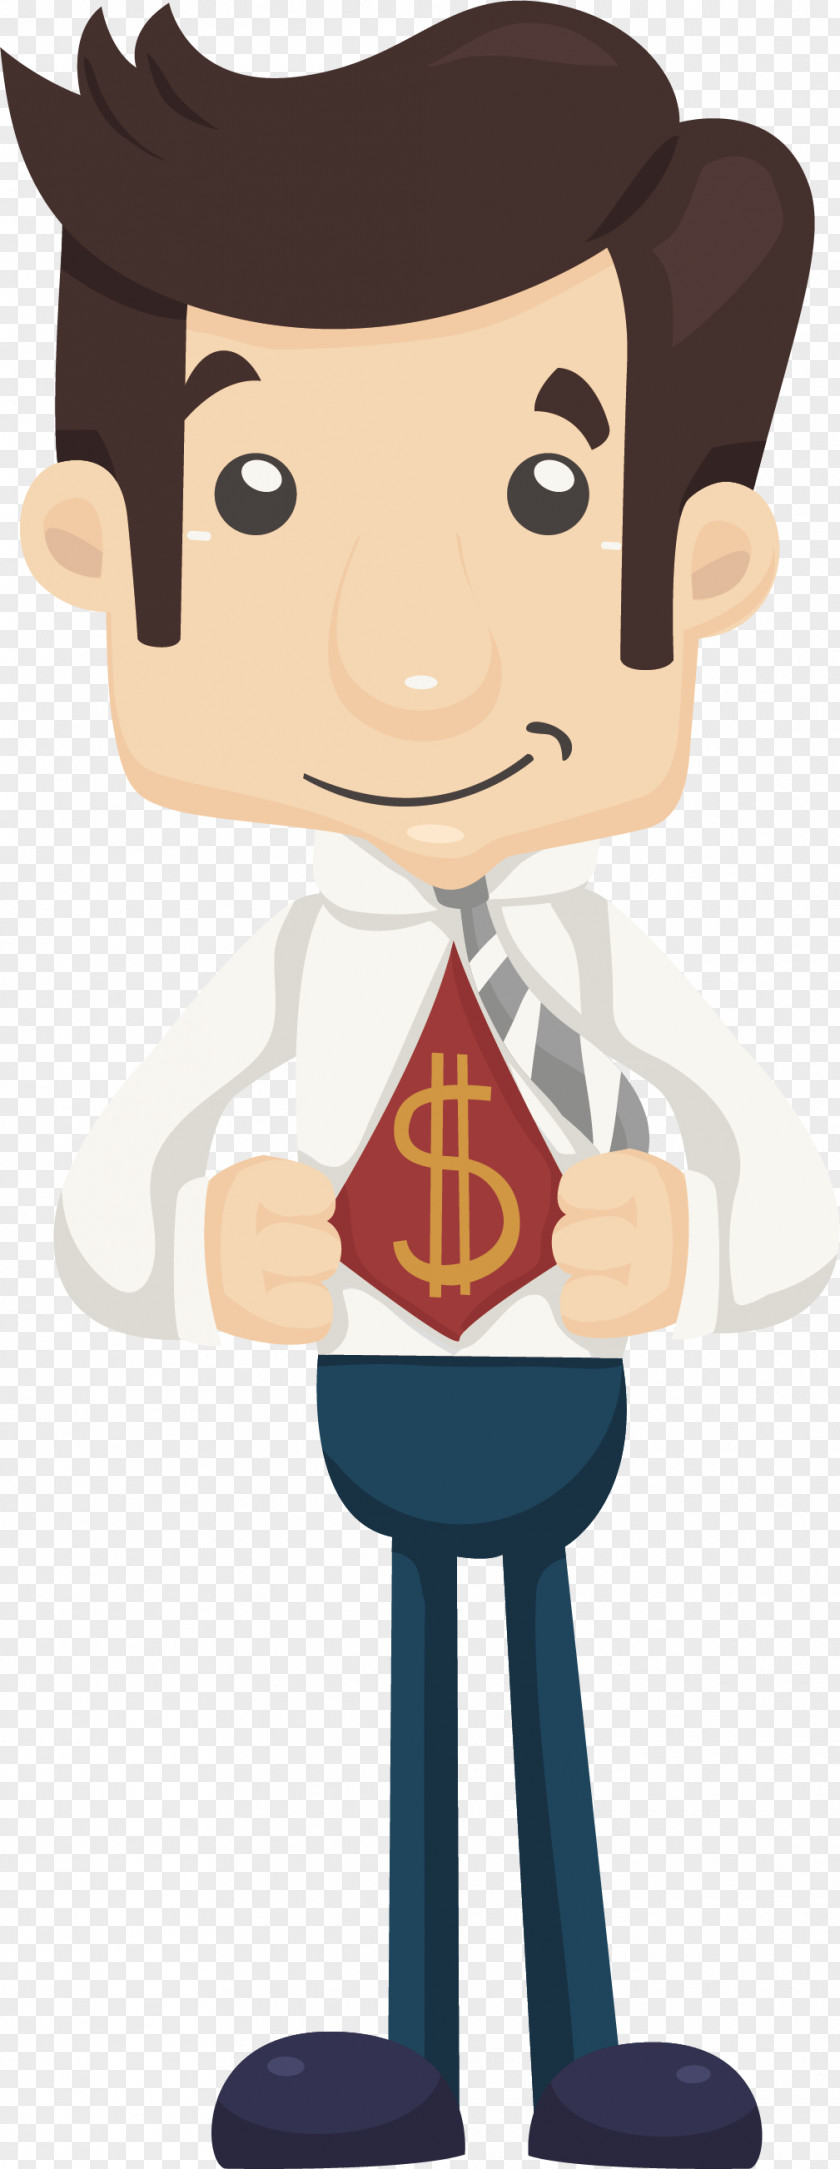 Business People Vector Material Cartoon Royalty-free Stock Photography Clip Art PNG